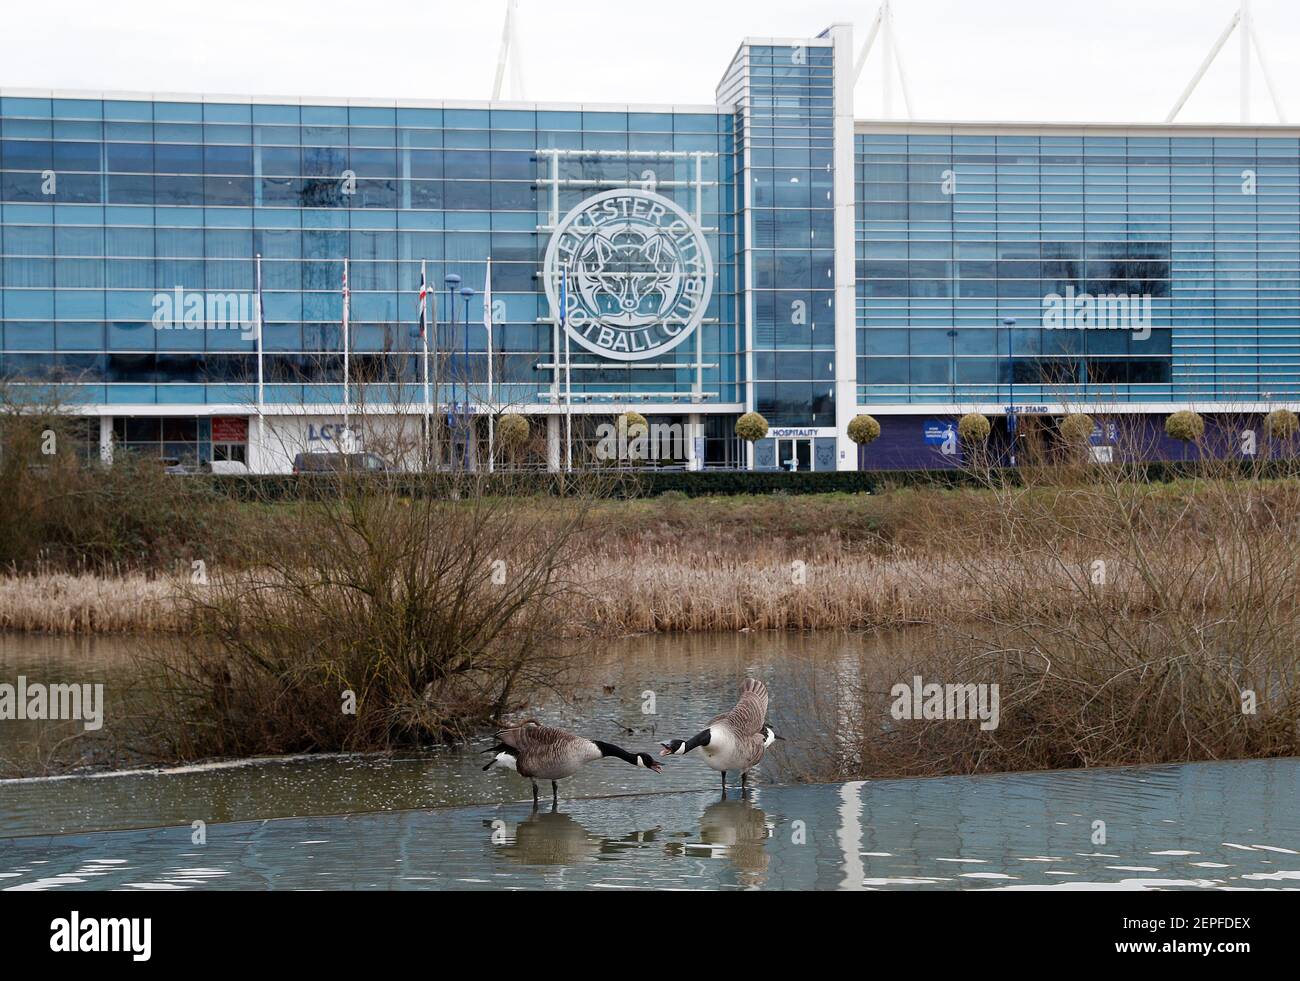 Leicester, Leicestershire, UK. 22nd February 2021. Geese squabble on the River Soar by the King Power Stadium, the home of Leicester City. Credit Darr Stock Photo